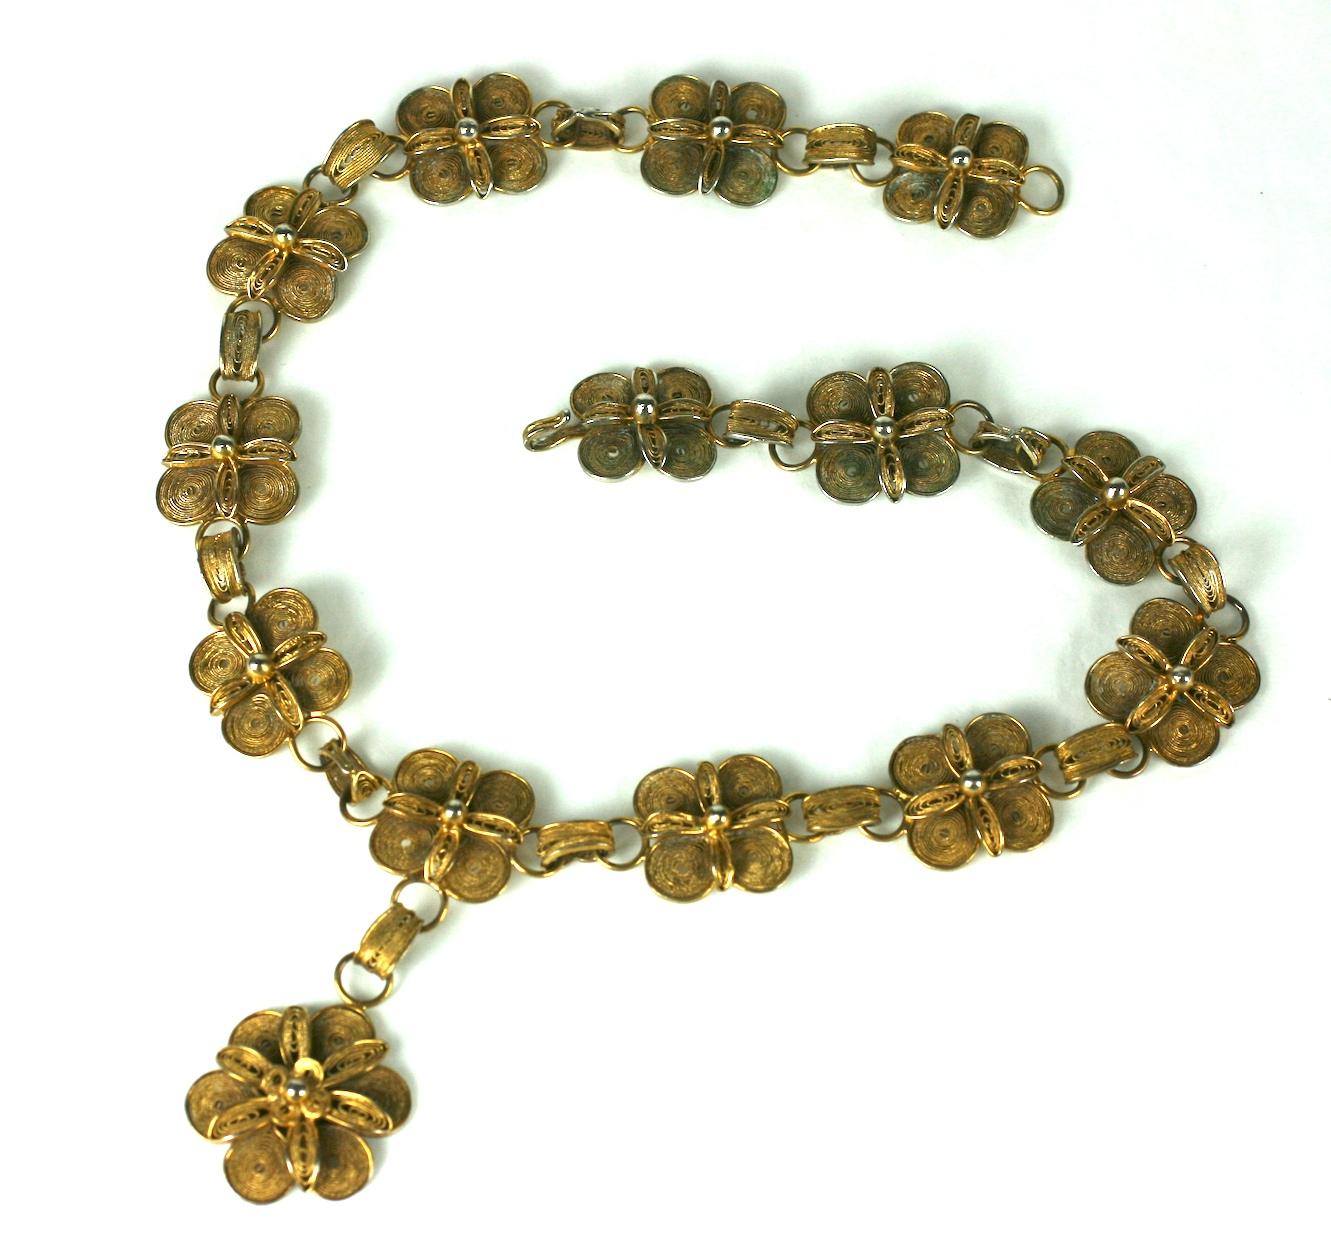 Antique Chinese gilt filigree silver necklace from the early 20th Century. Quatrefoil stations with floral centers form the links of the necklace with a large gilt floral pendant drop. 1930's Chinese. 19